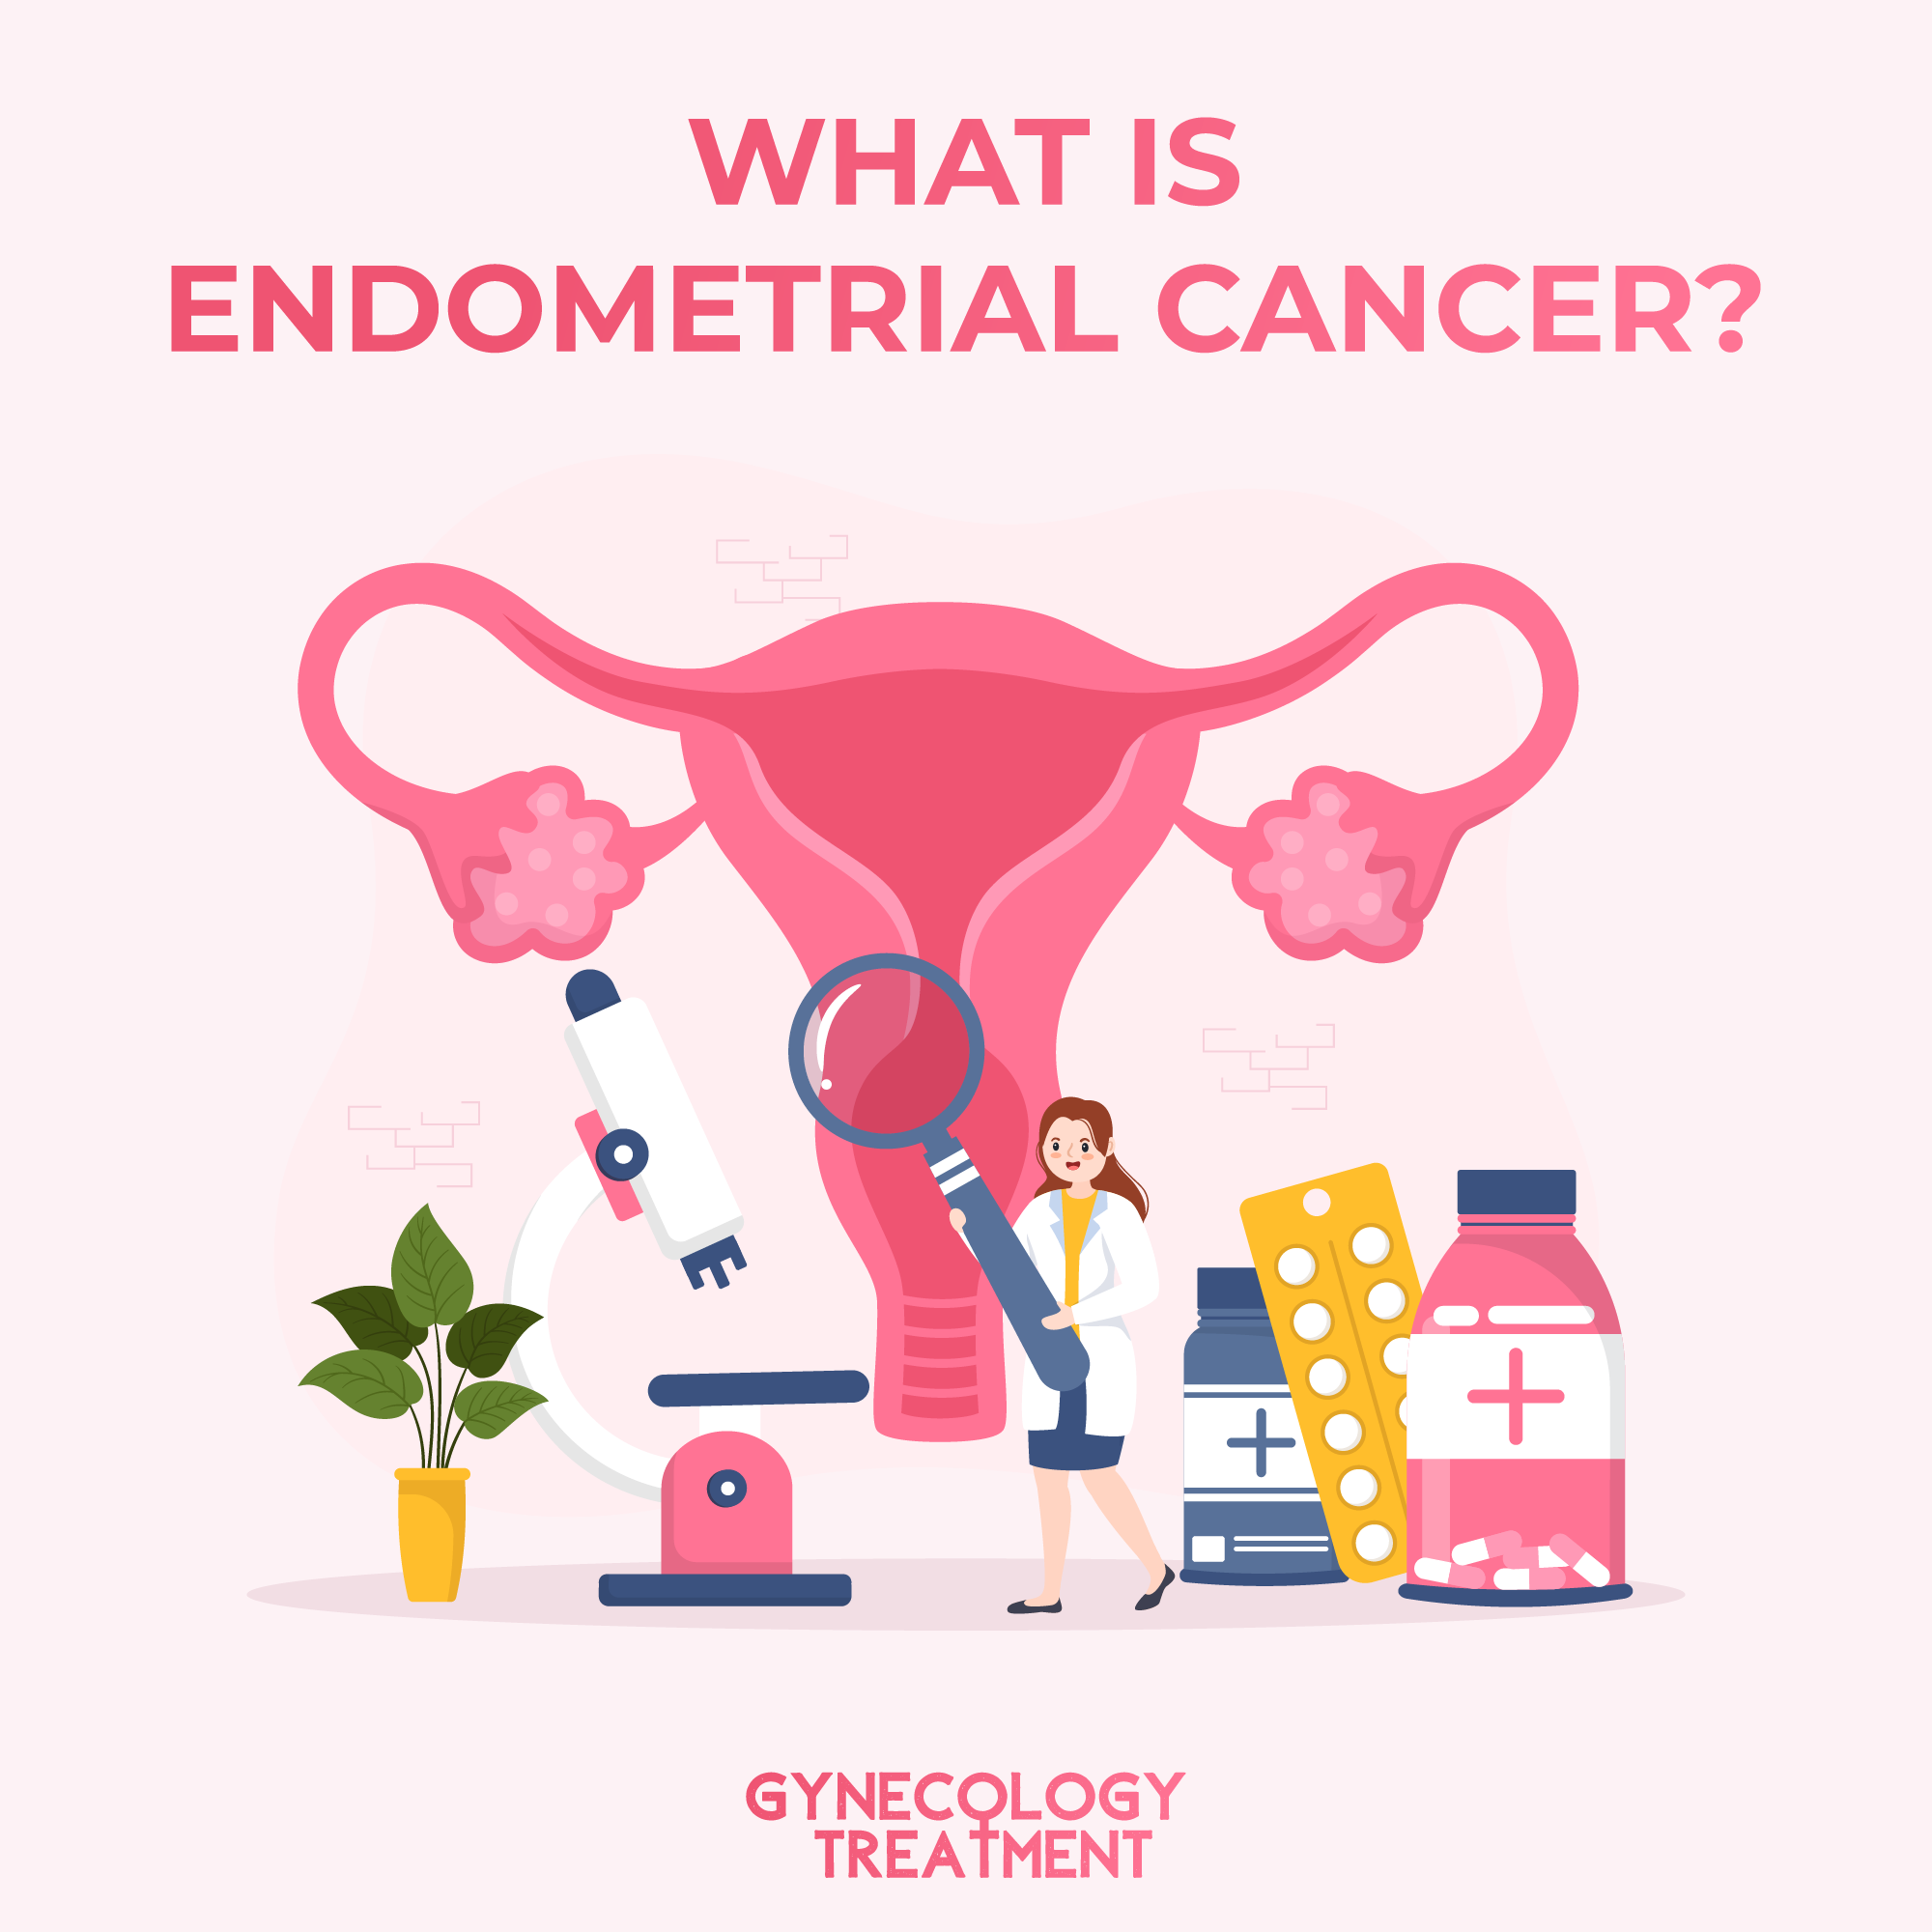 What is endometrial cancer?